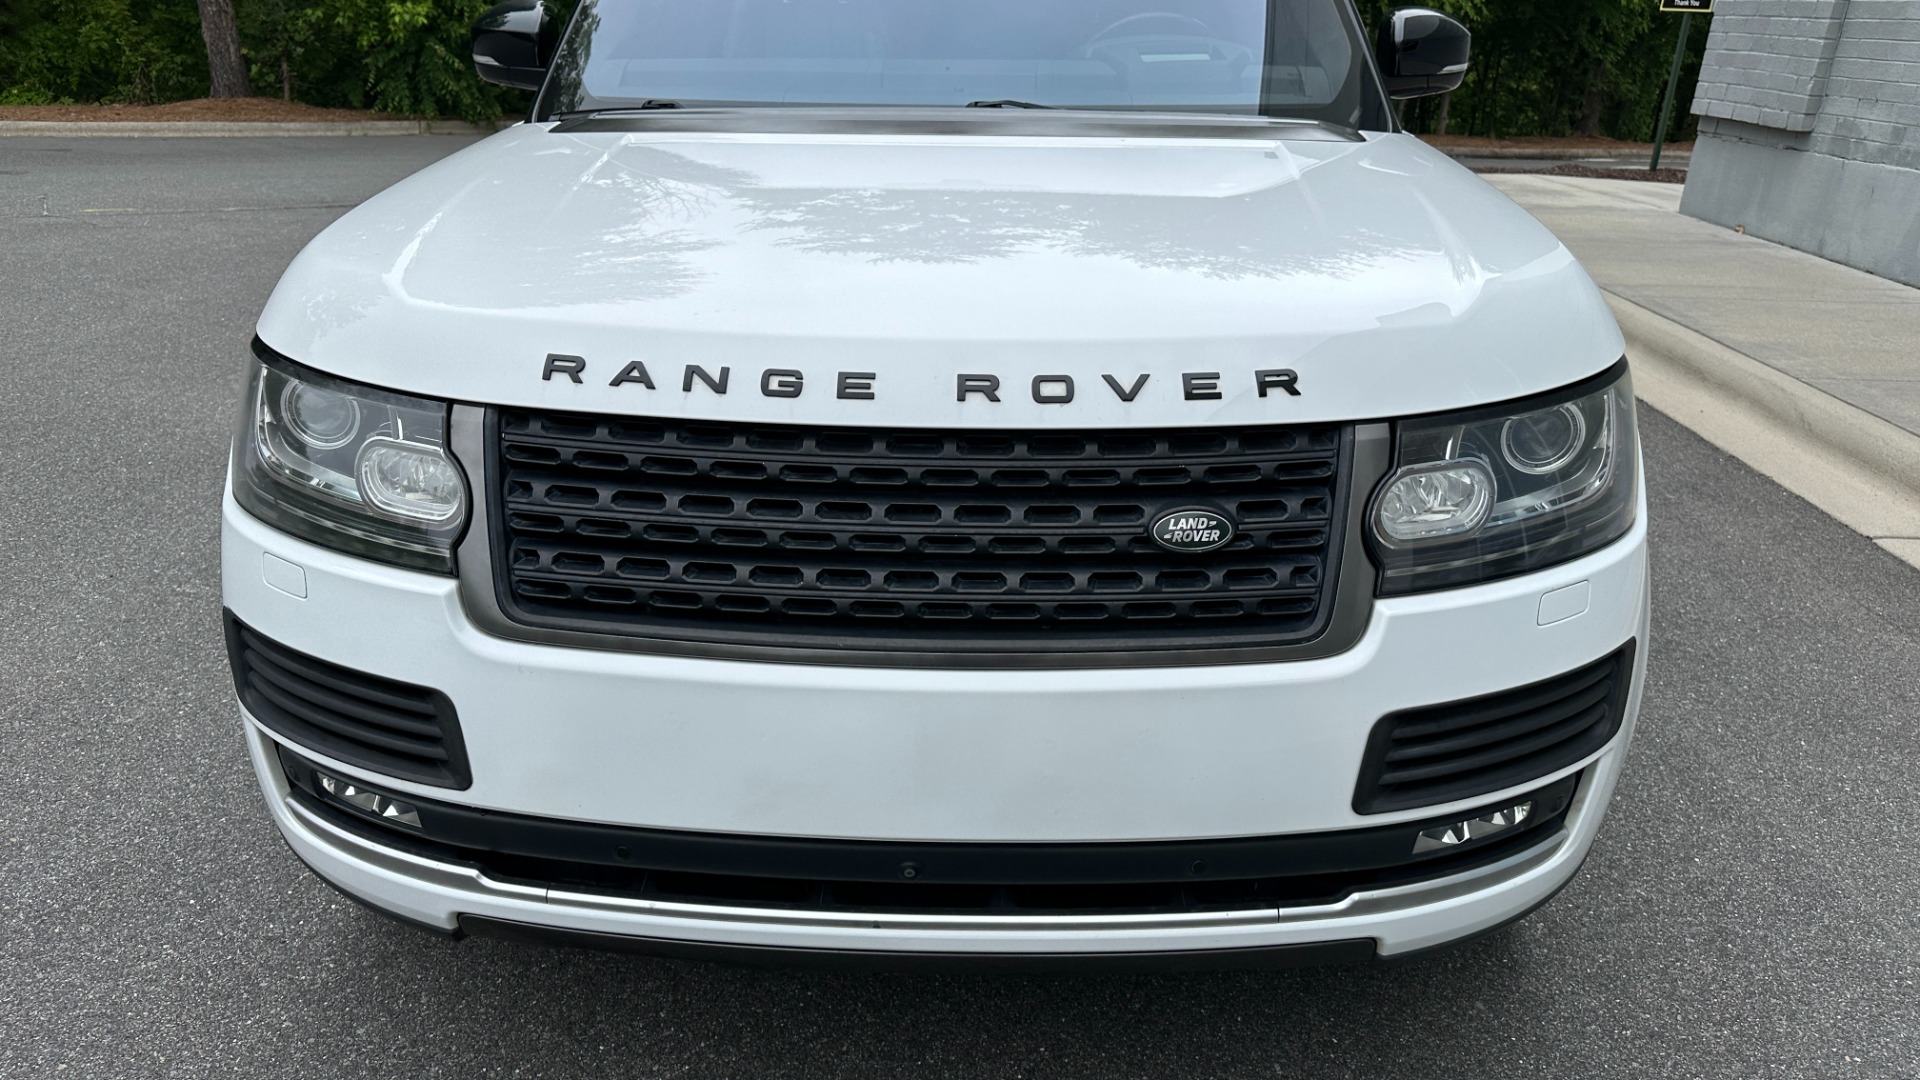 Used 2016 Land Rover Range Rover SUPERCHARGED 5.0 LWB / MERIDIAN / 22IN WHEELS / TOW PKG / CLIMATE PKG for sale $44,000 at Formula Imports in Charlotte NC 28227 8